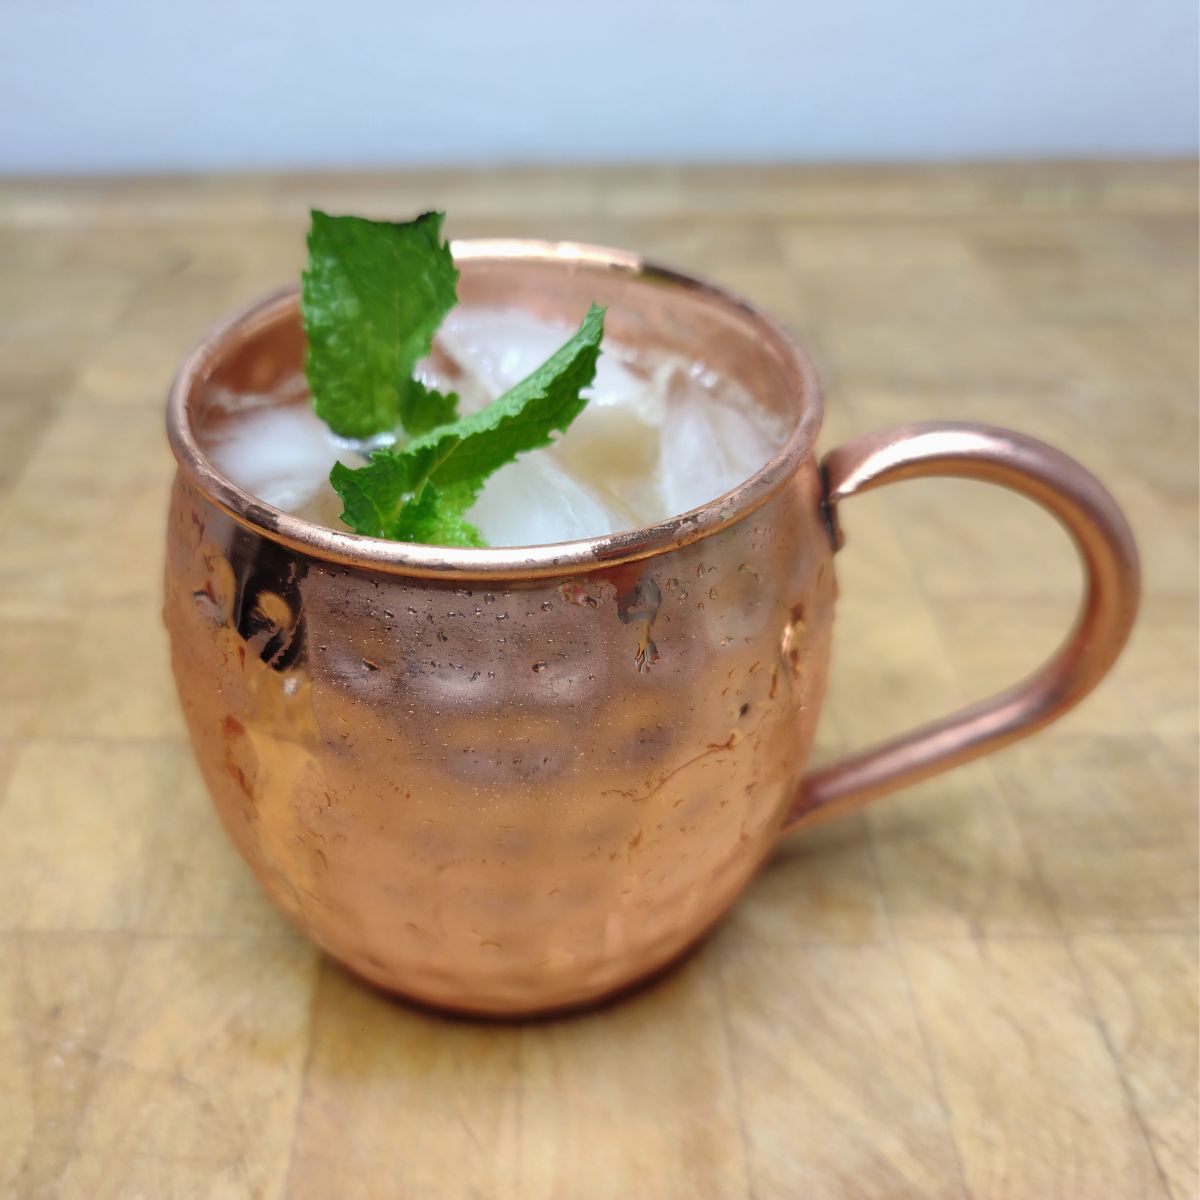 French mule on a wooden table with mint in the mug.